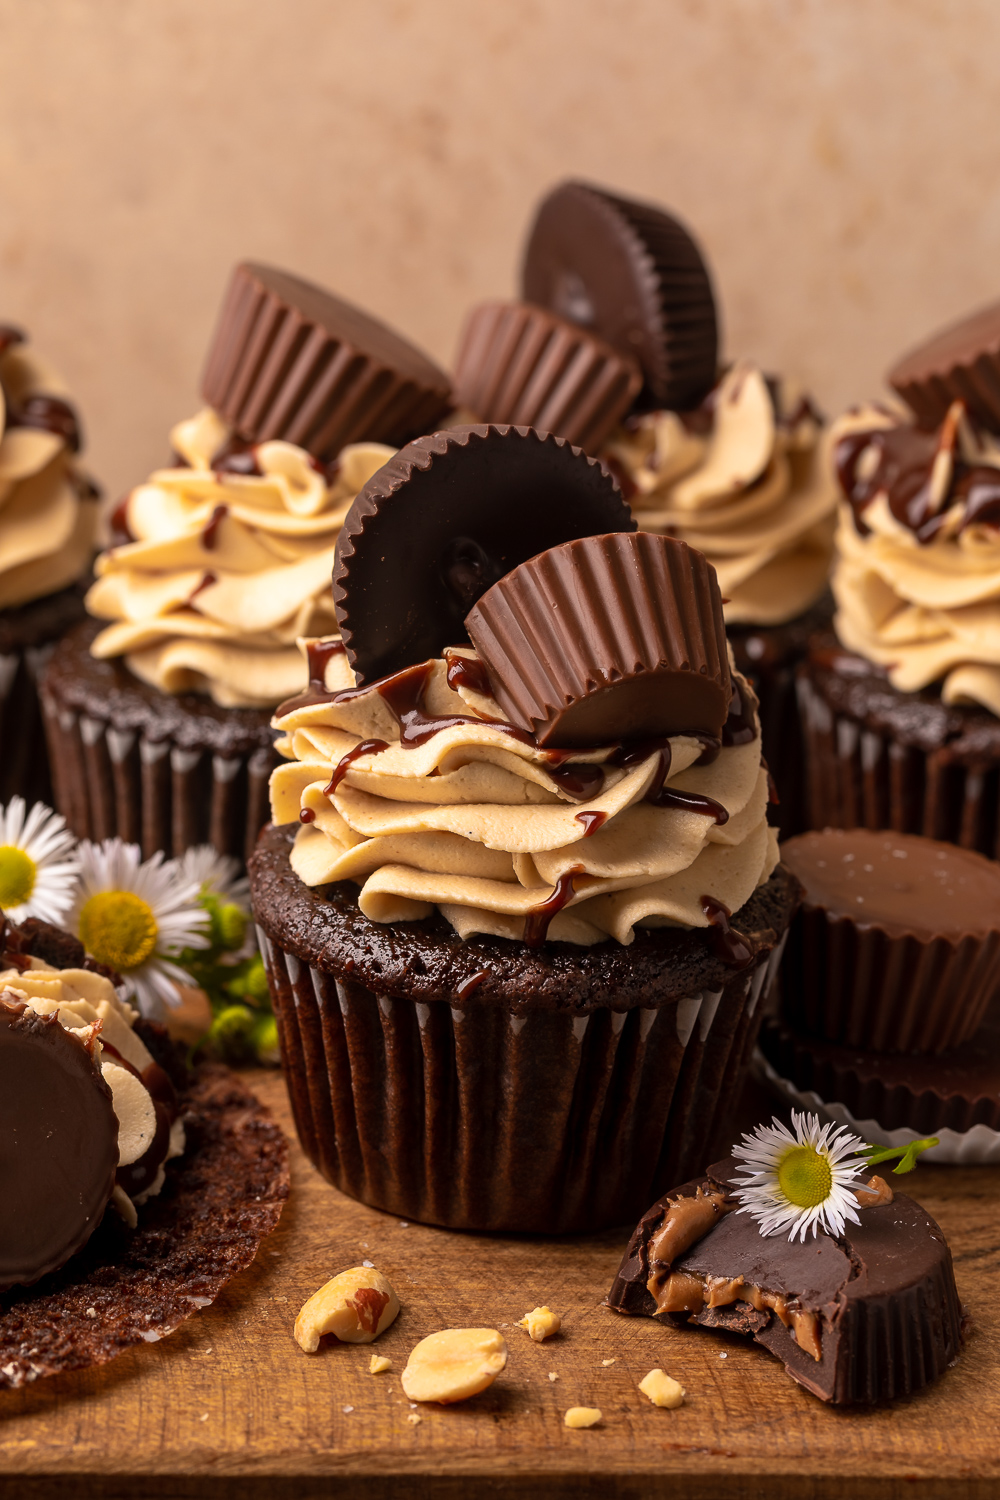 Have a peanut butter lover in your life? You have to bake them these Ultimate Chocolate Peanut Butter Cupcakes!  Featuring moist chocolate cupcakes that are stuffed with a peanut butter cup, topped with peanut butter frosting, milk chocolate peanut butter ganache, and chopped peanuts, these are always a crowd-pleaser!